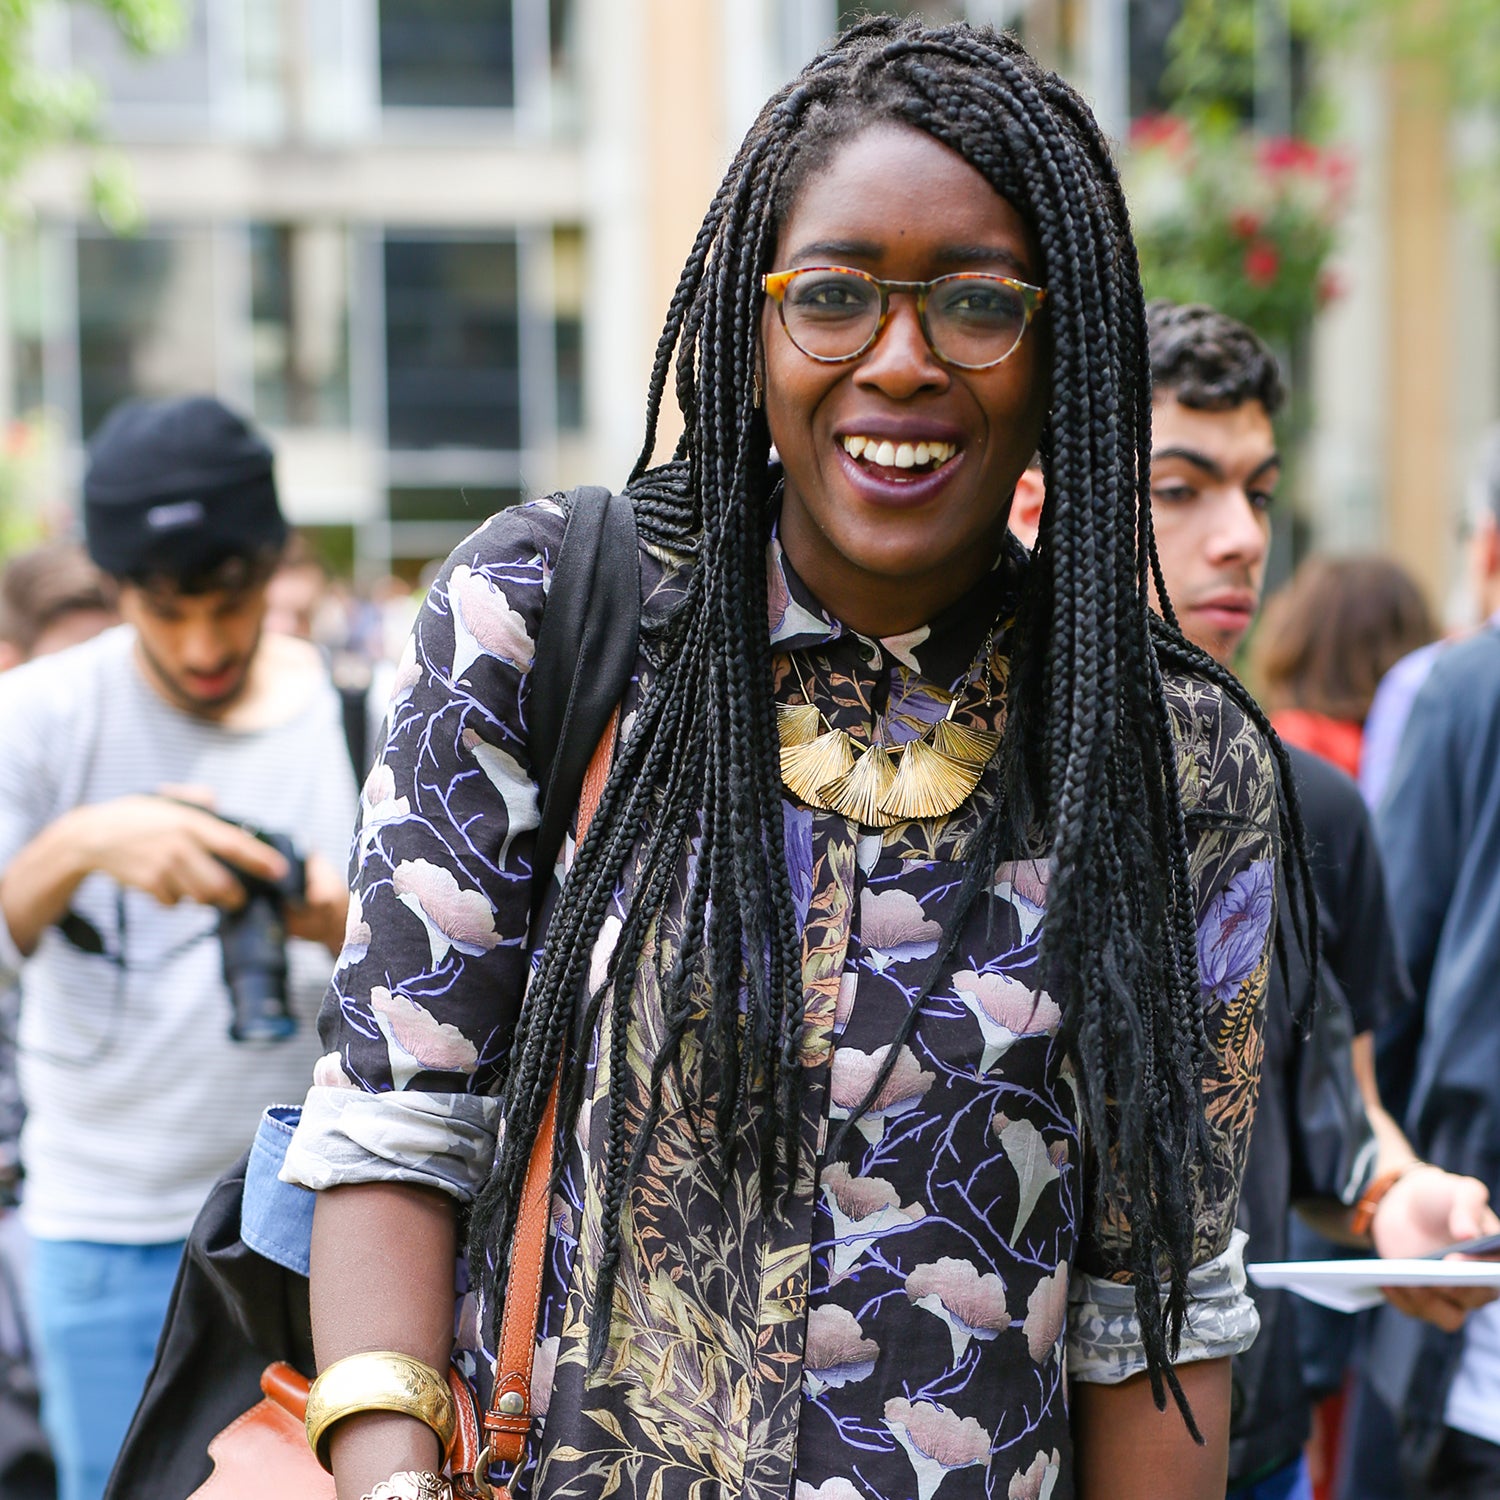 Braided Hairstyles Were Spotted all Over Paris Men's Fashion Week
